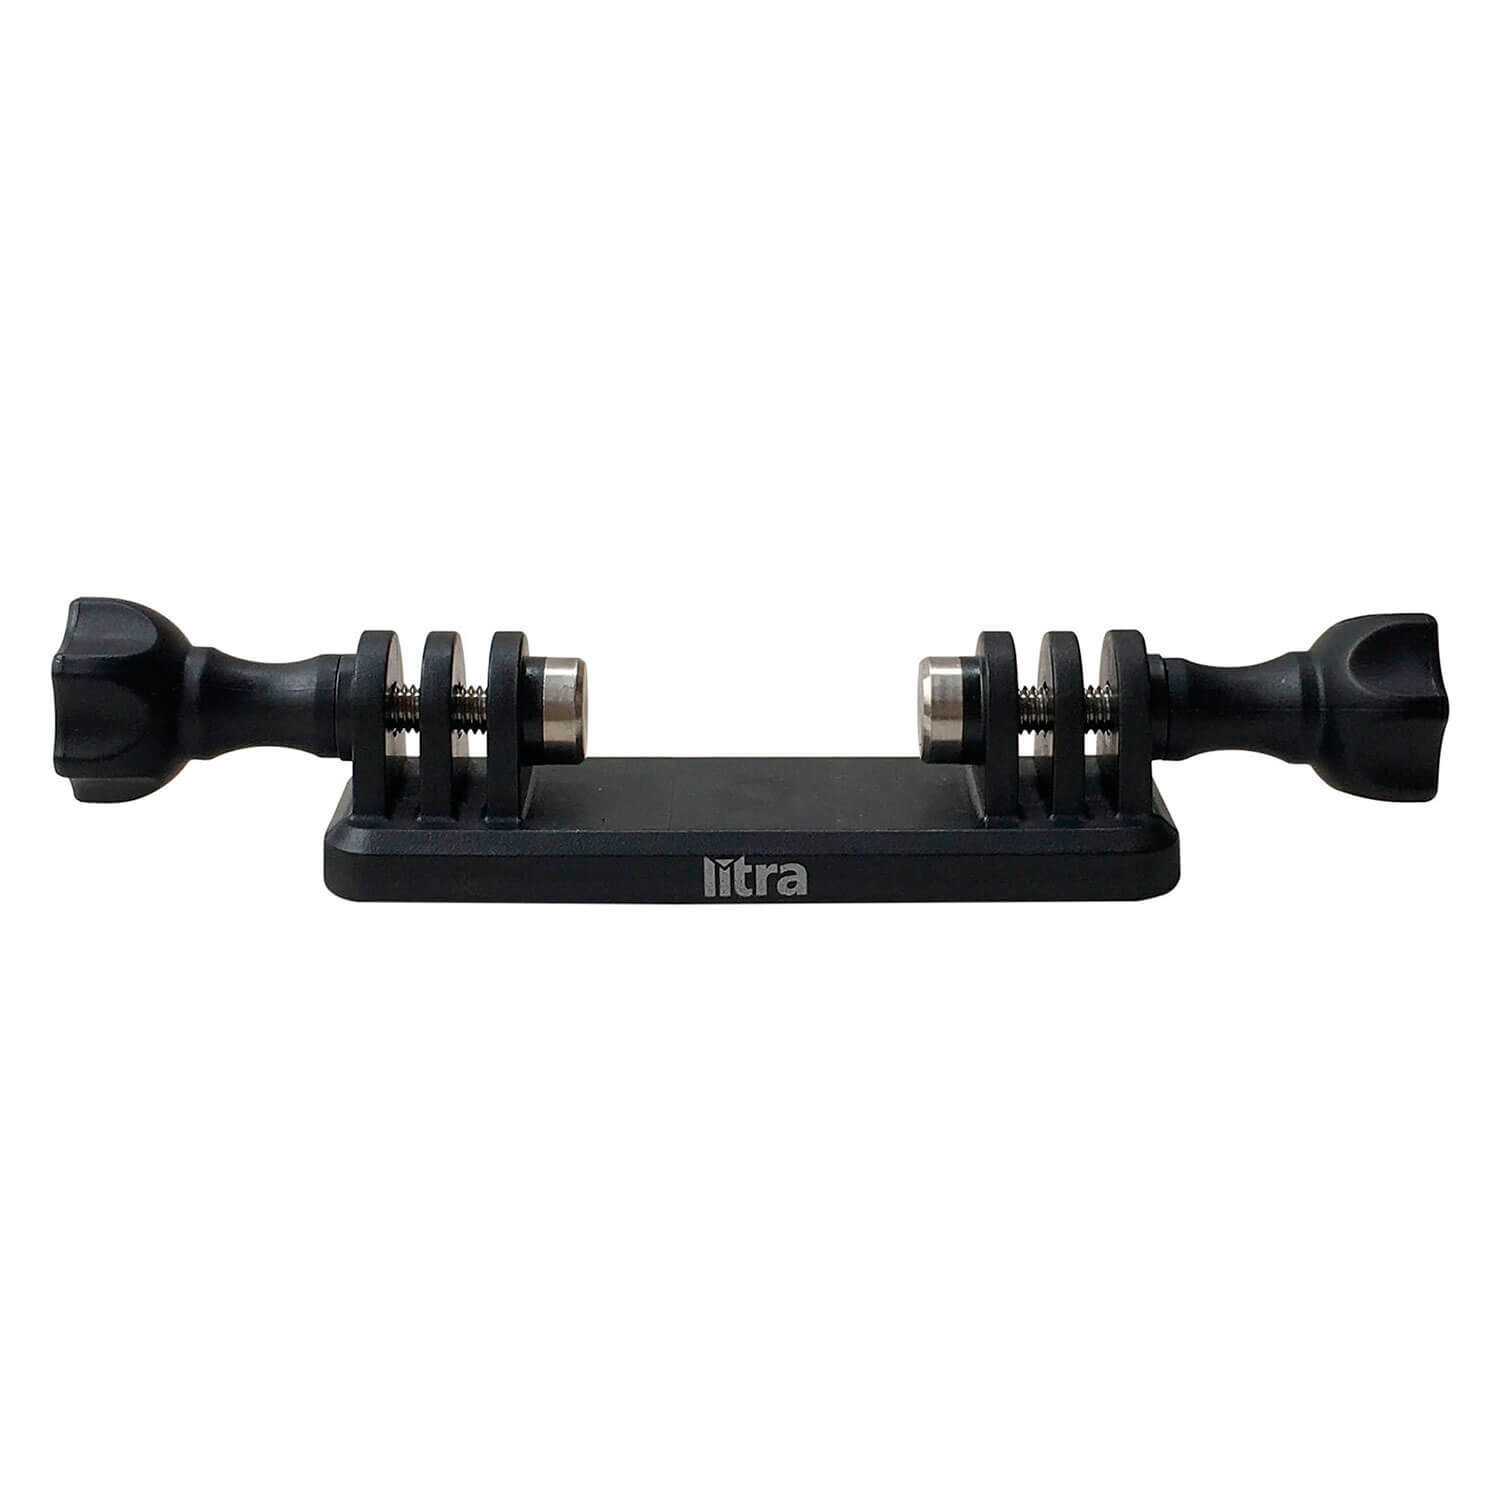 Litra Double Mount